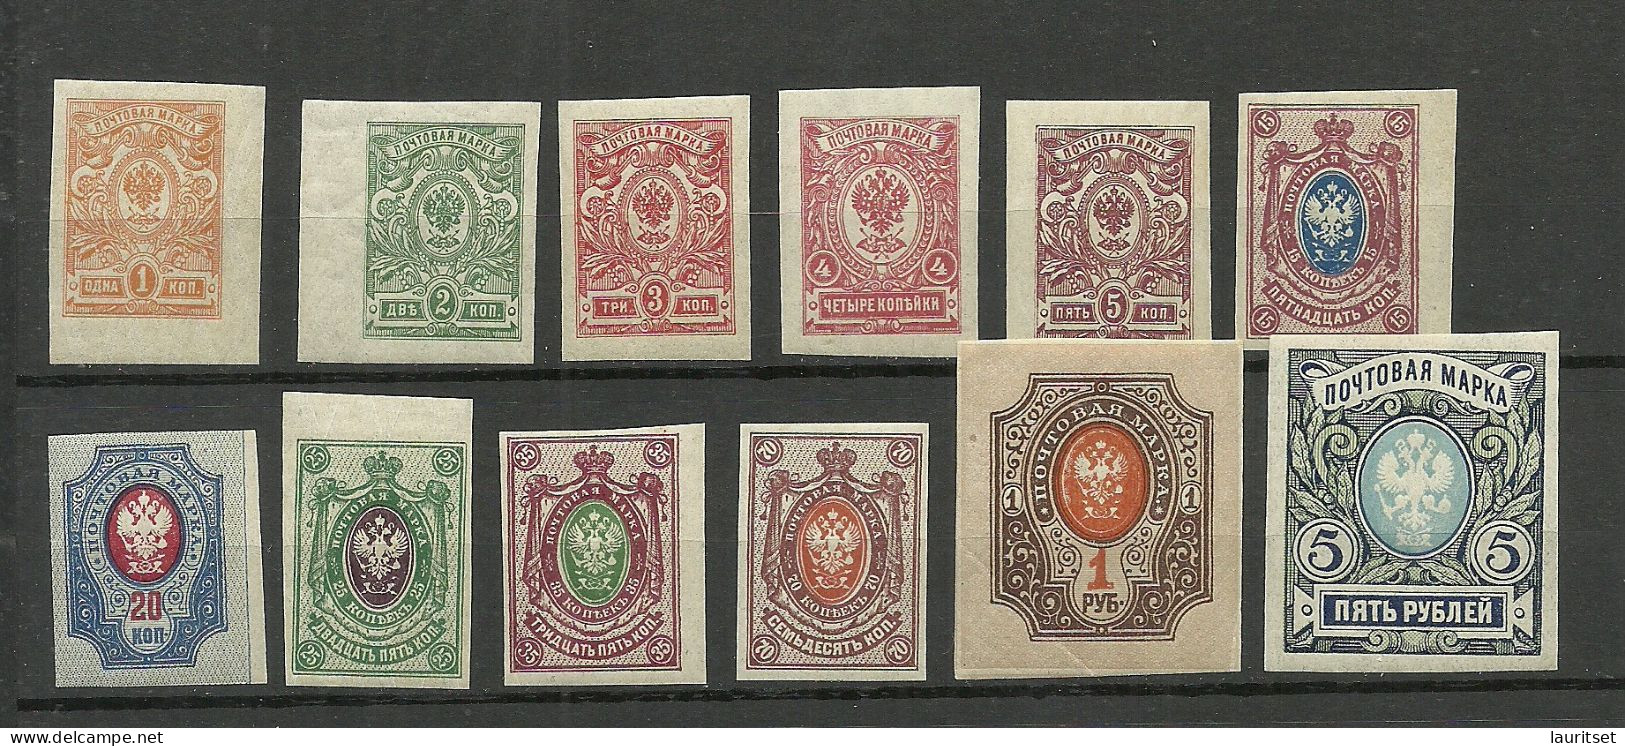 RUSSLAND RUSSIA 1917 = 12 Values From Set Michel 63 - 81 B MNH - Unused Stamps